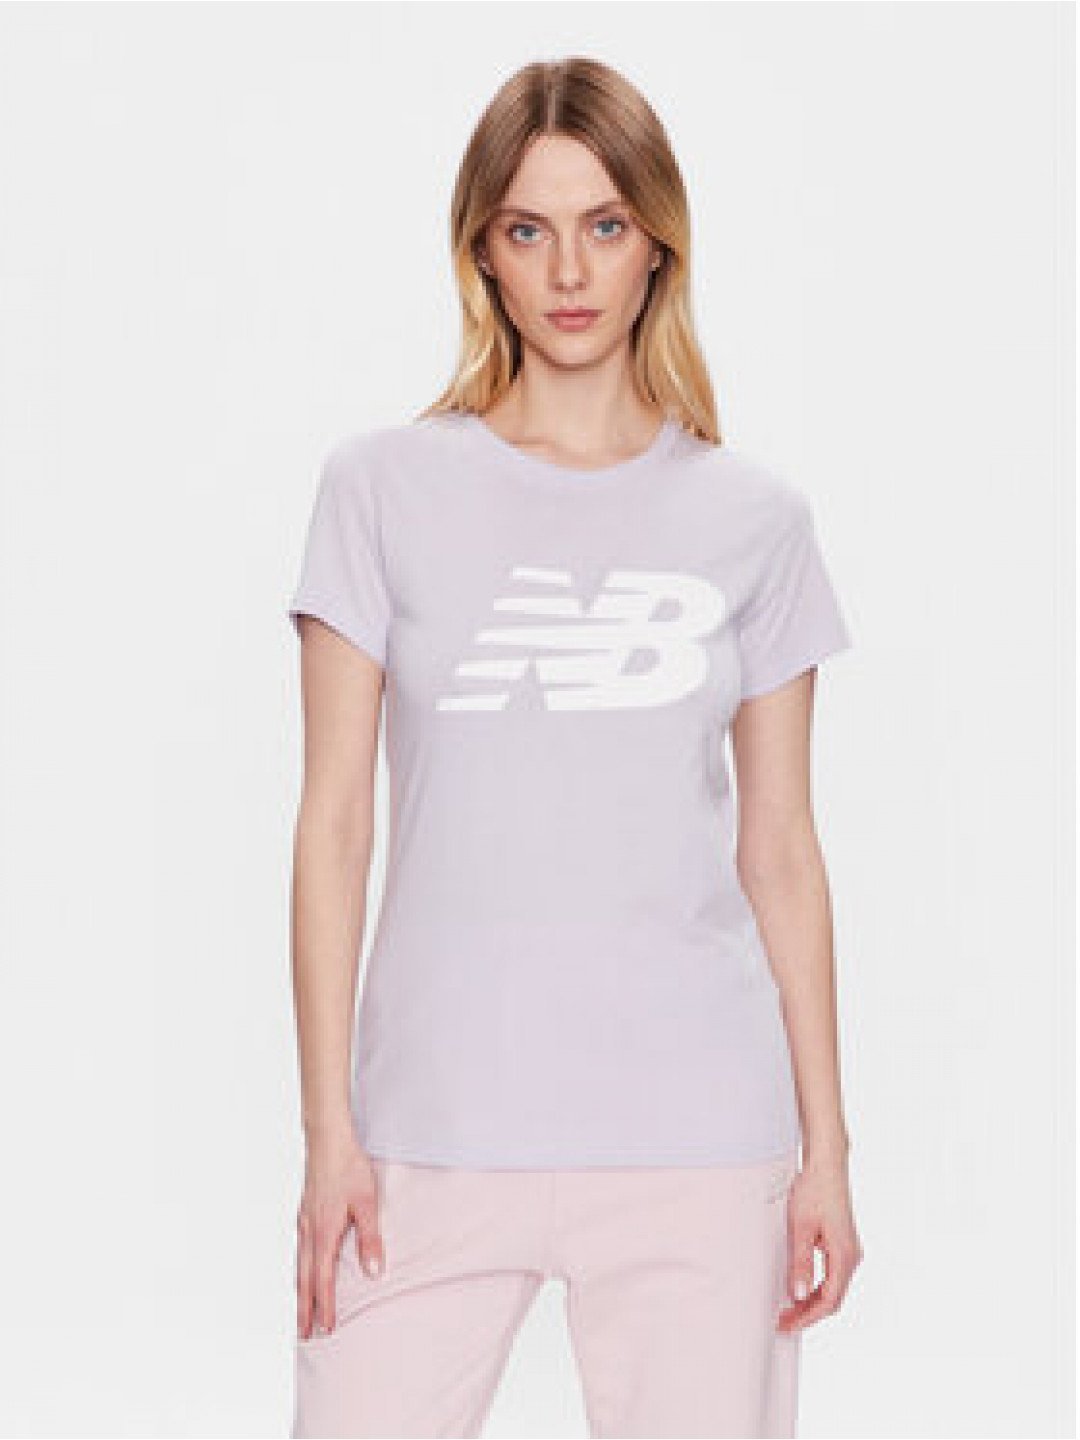 New Balance T-Shirt Classic Flying Nb Graphic WT03816 Fialová Athletic Fit